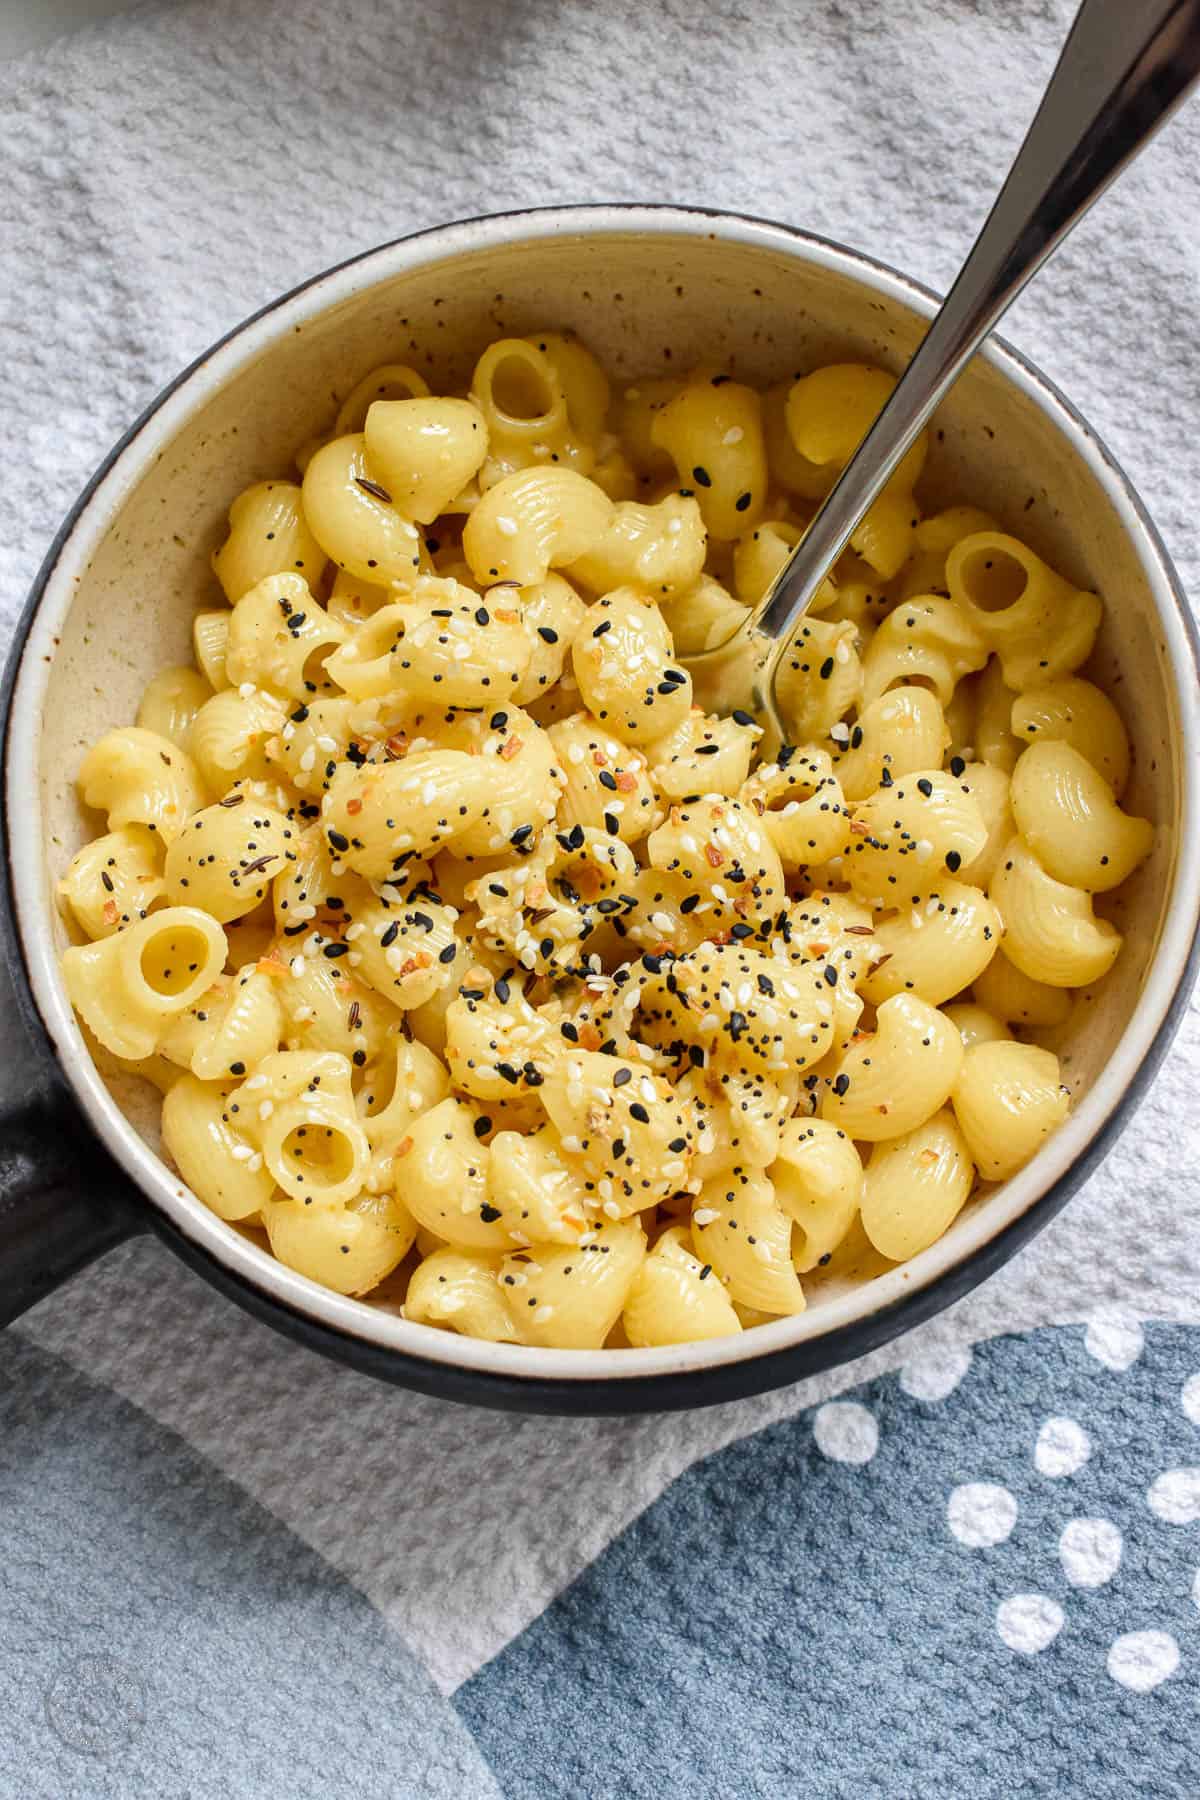 Short pasta noodles coated in thin sauce and topped with everything bagel seasoning